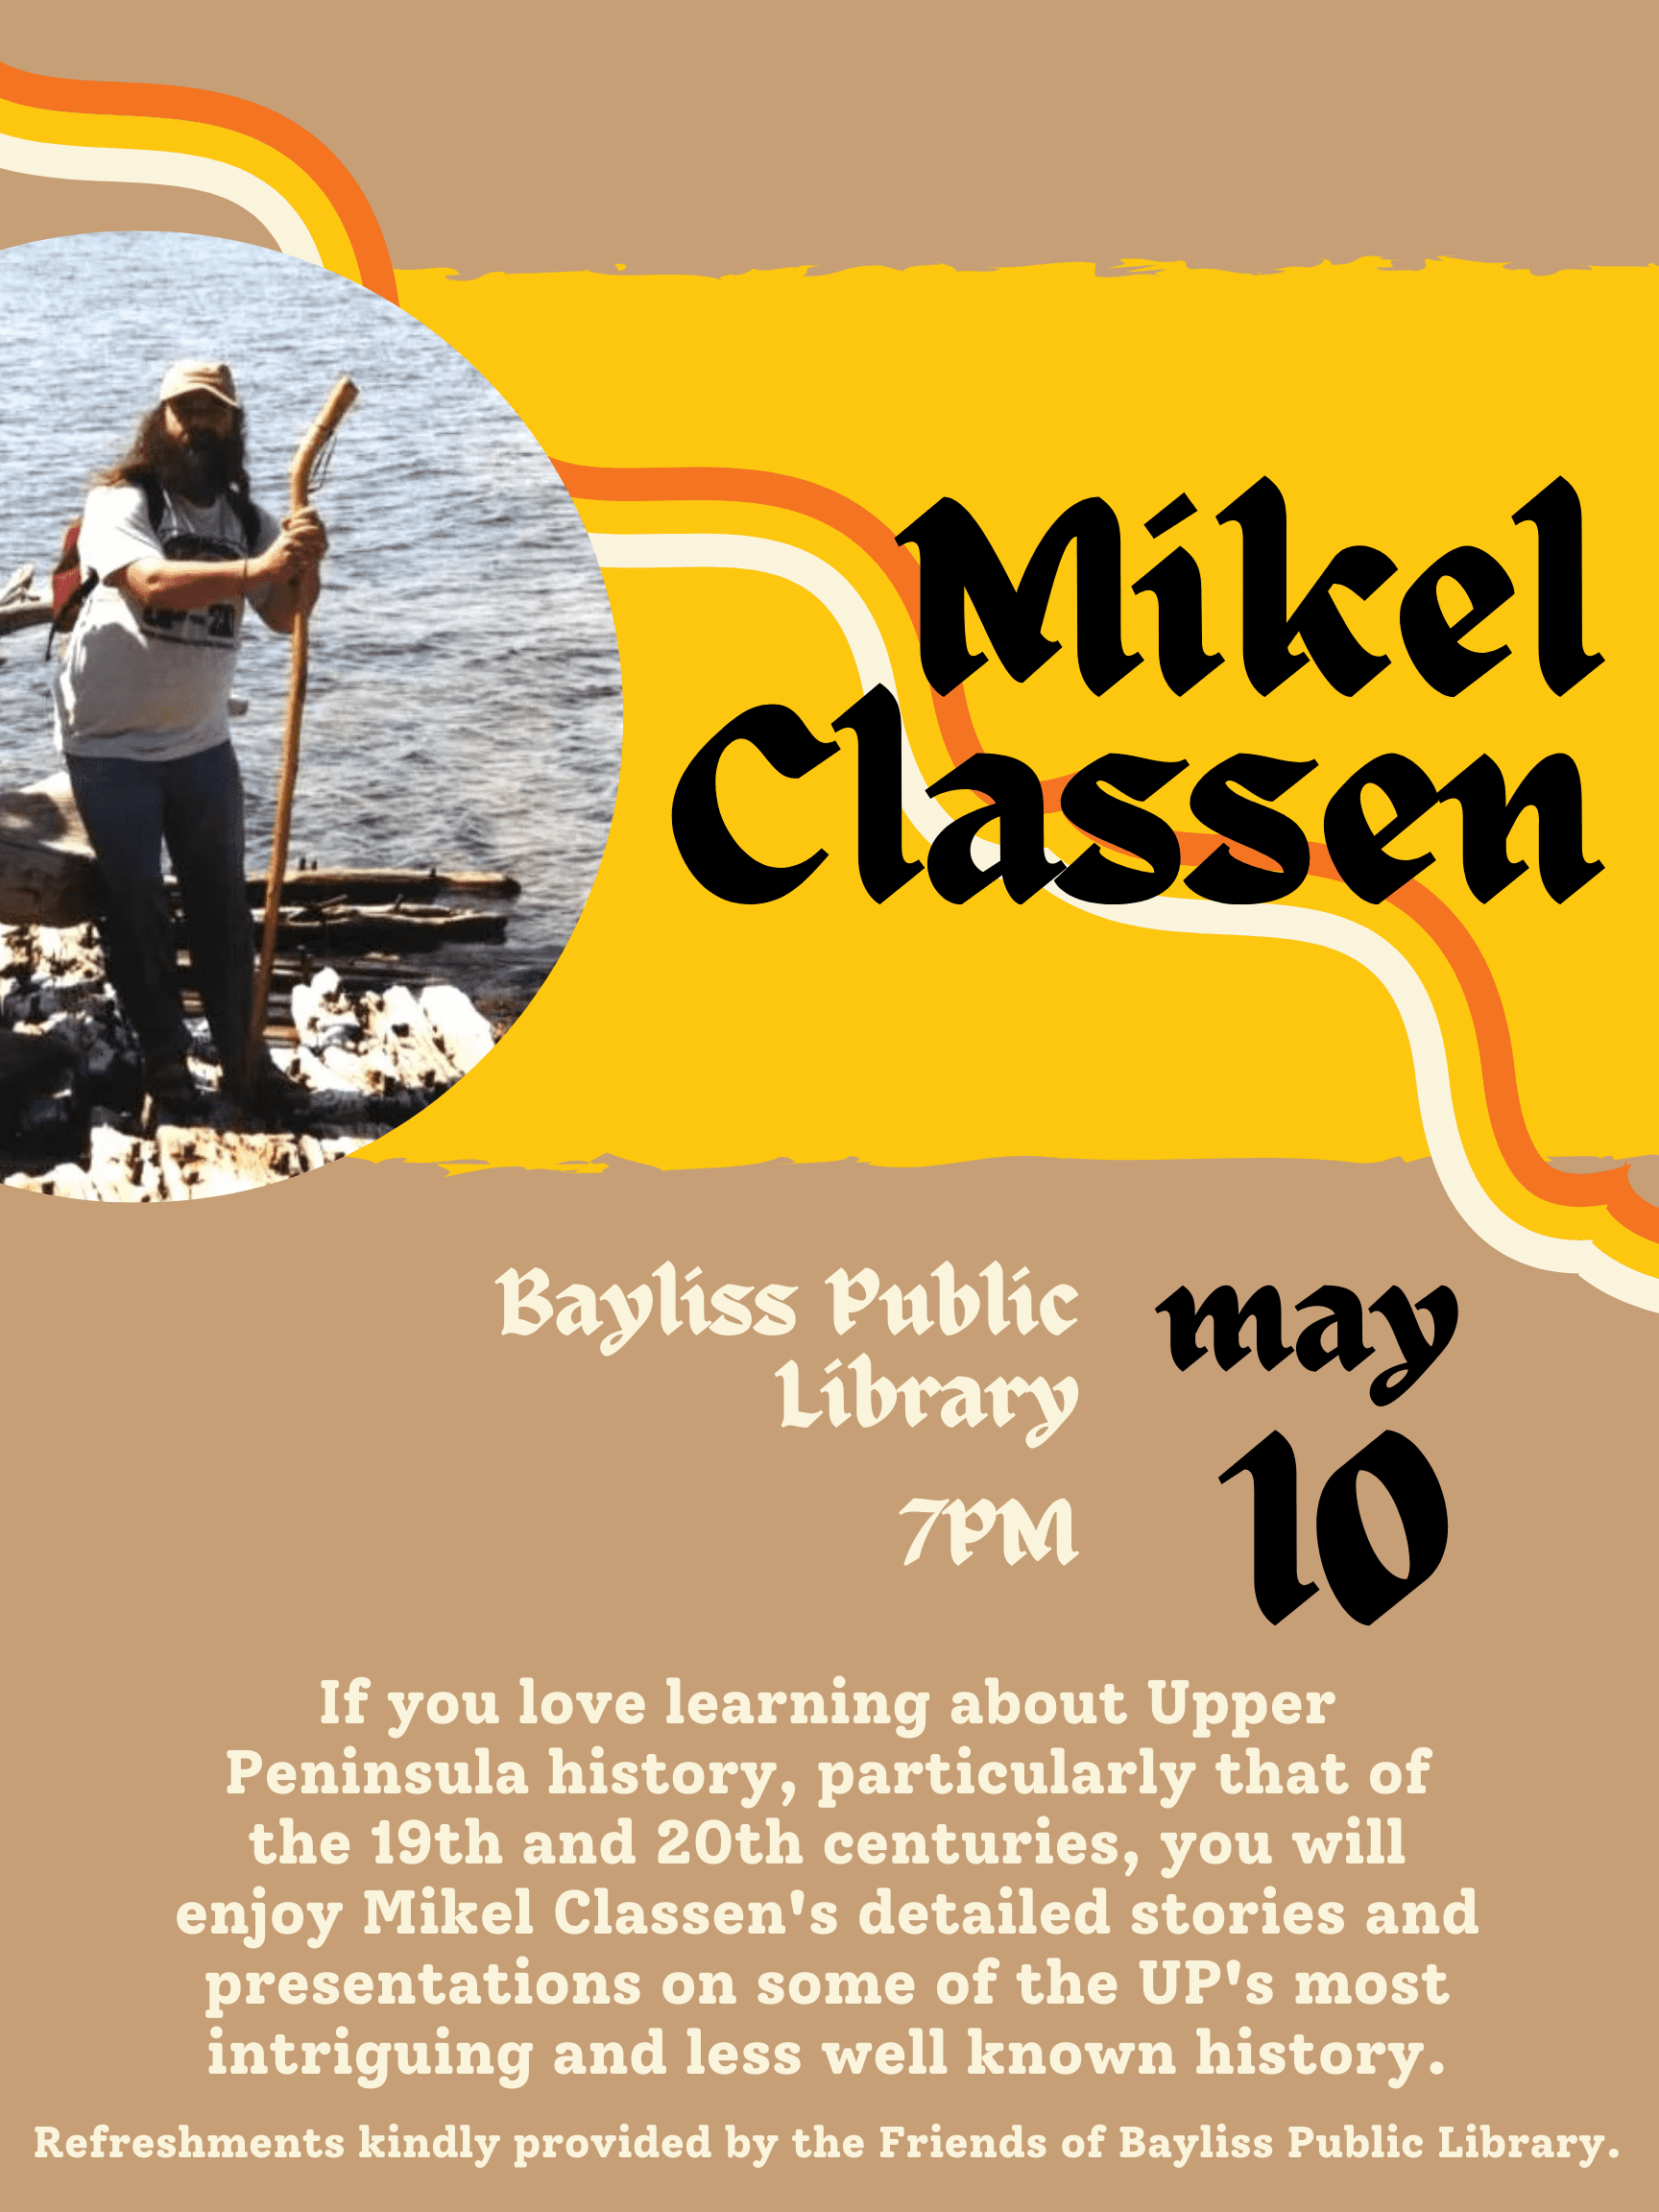 mikel classen at bayliss public library